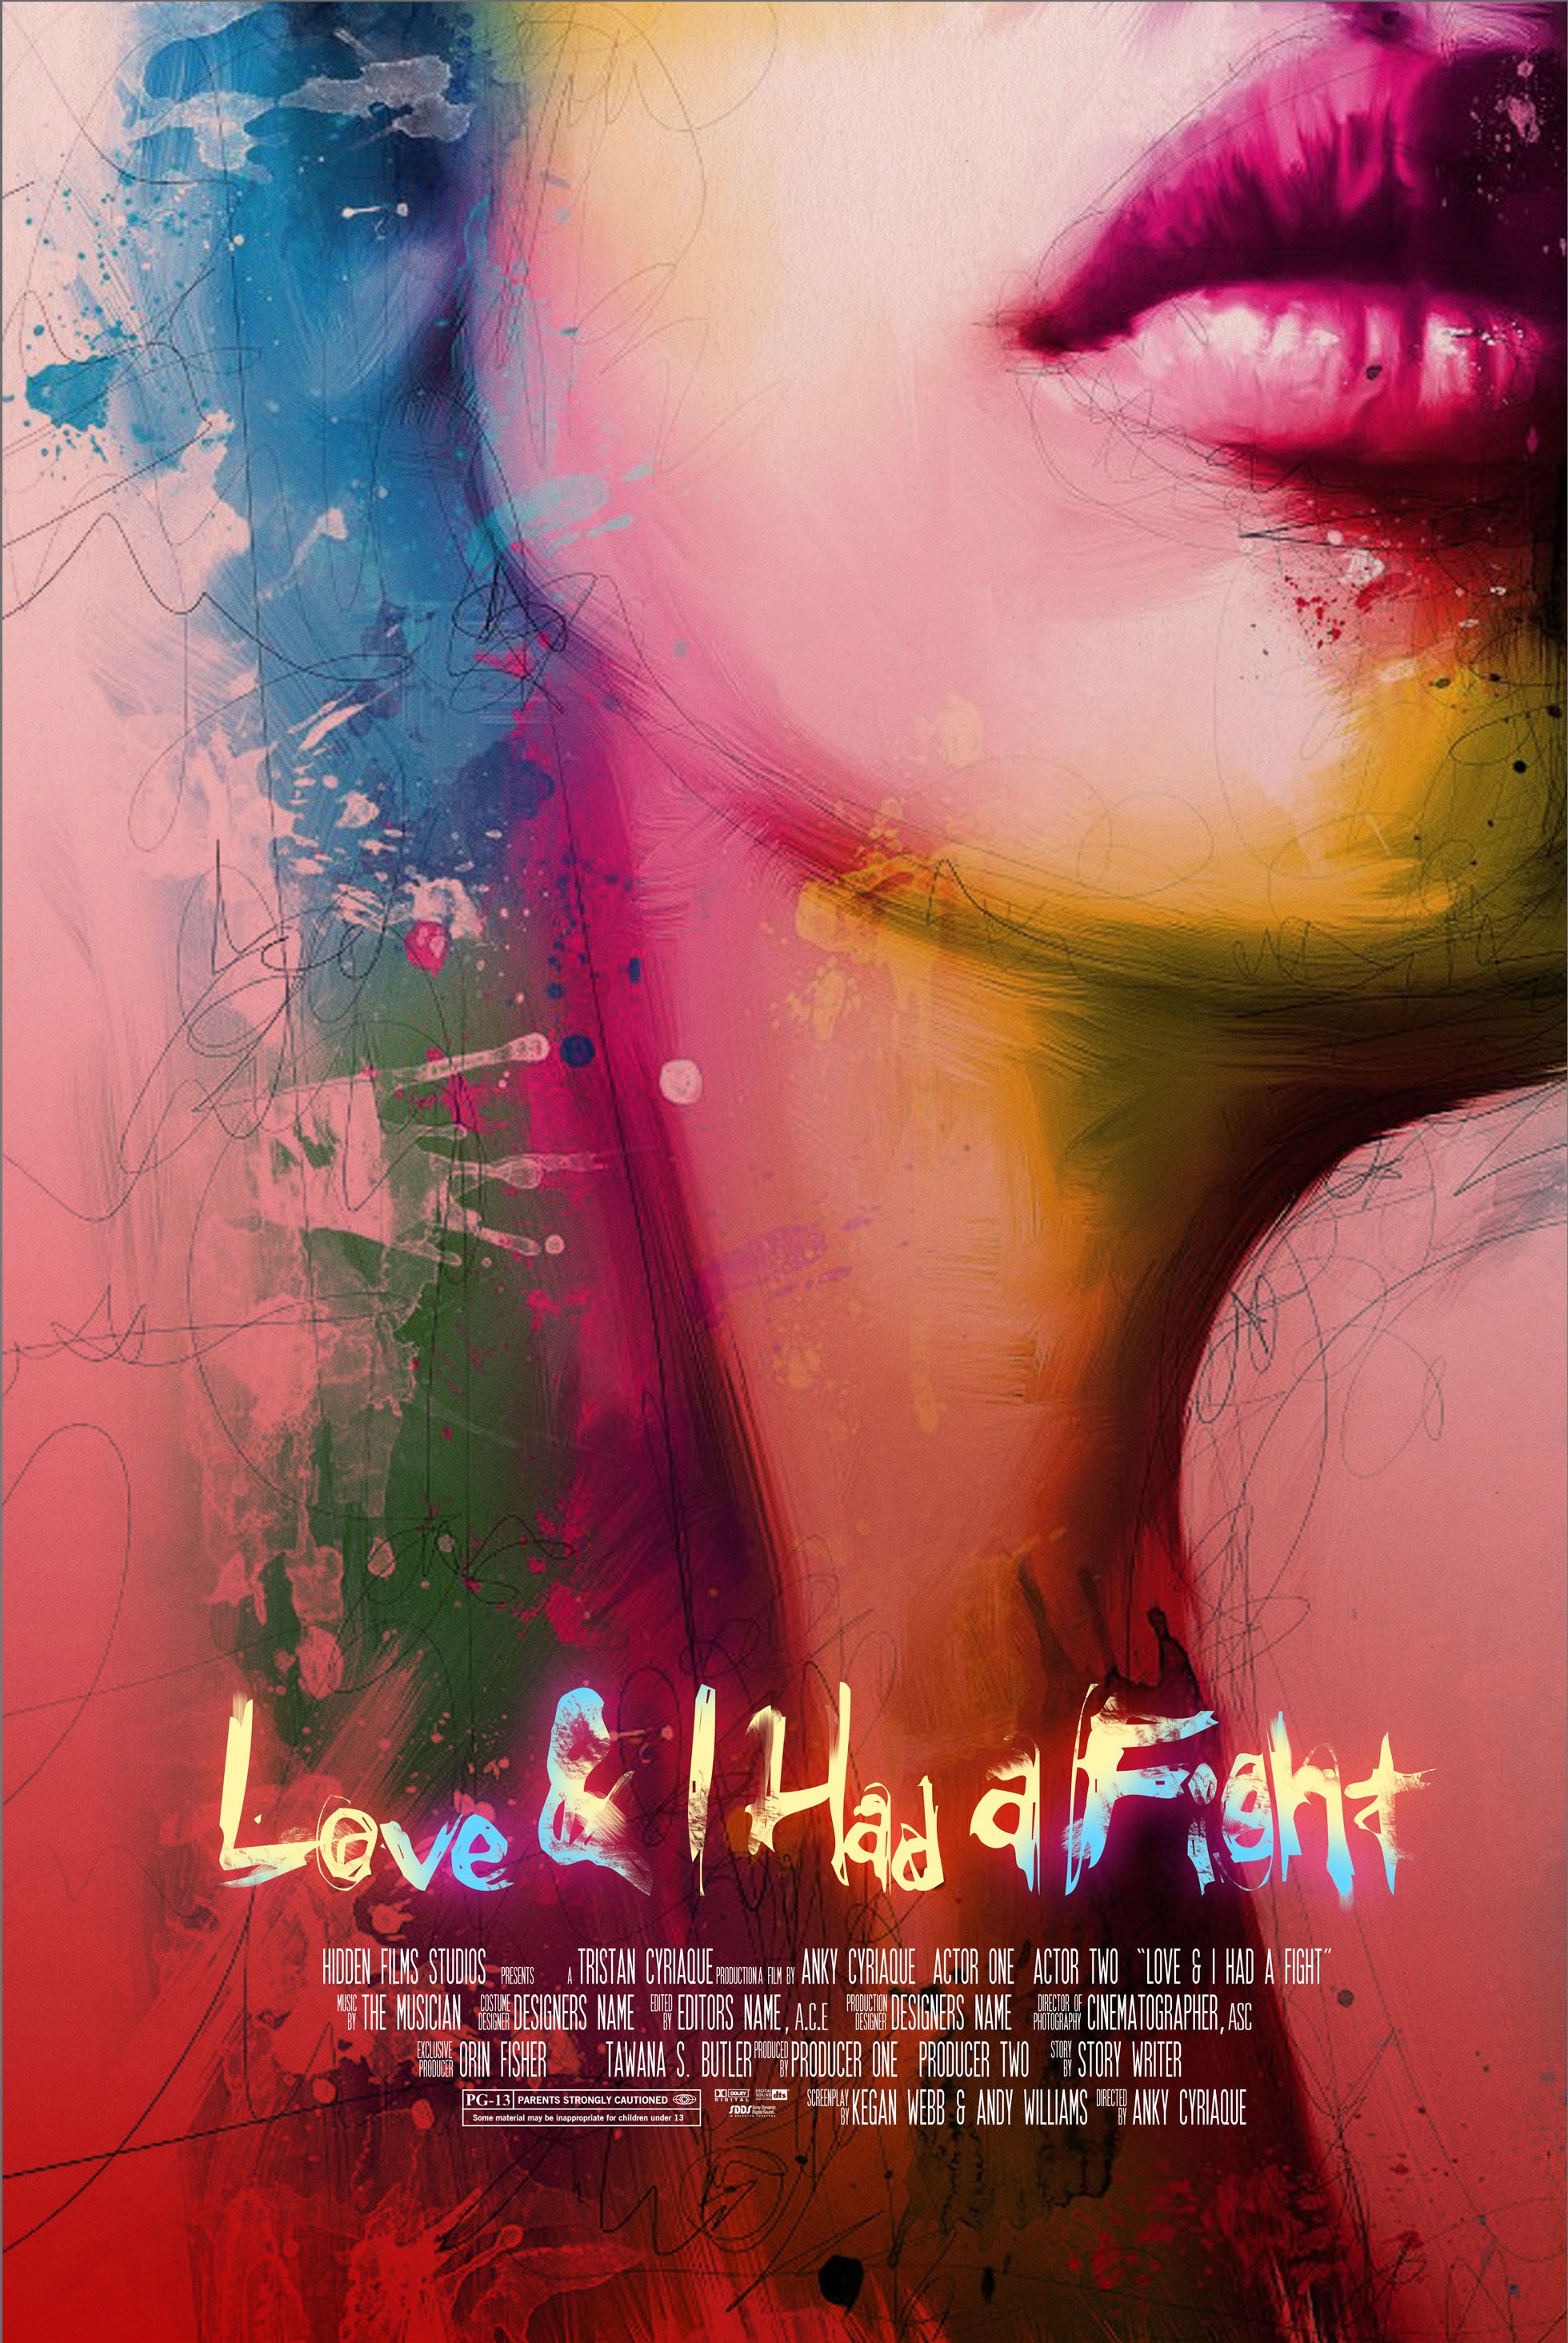 Mega Sized Movie Poster Image for Love & I Had A Fight